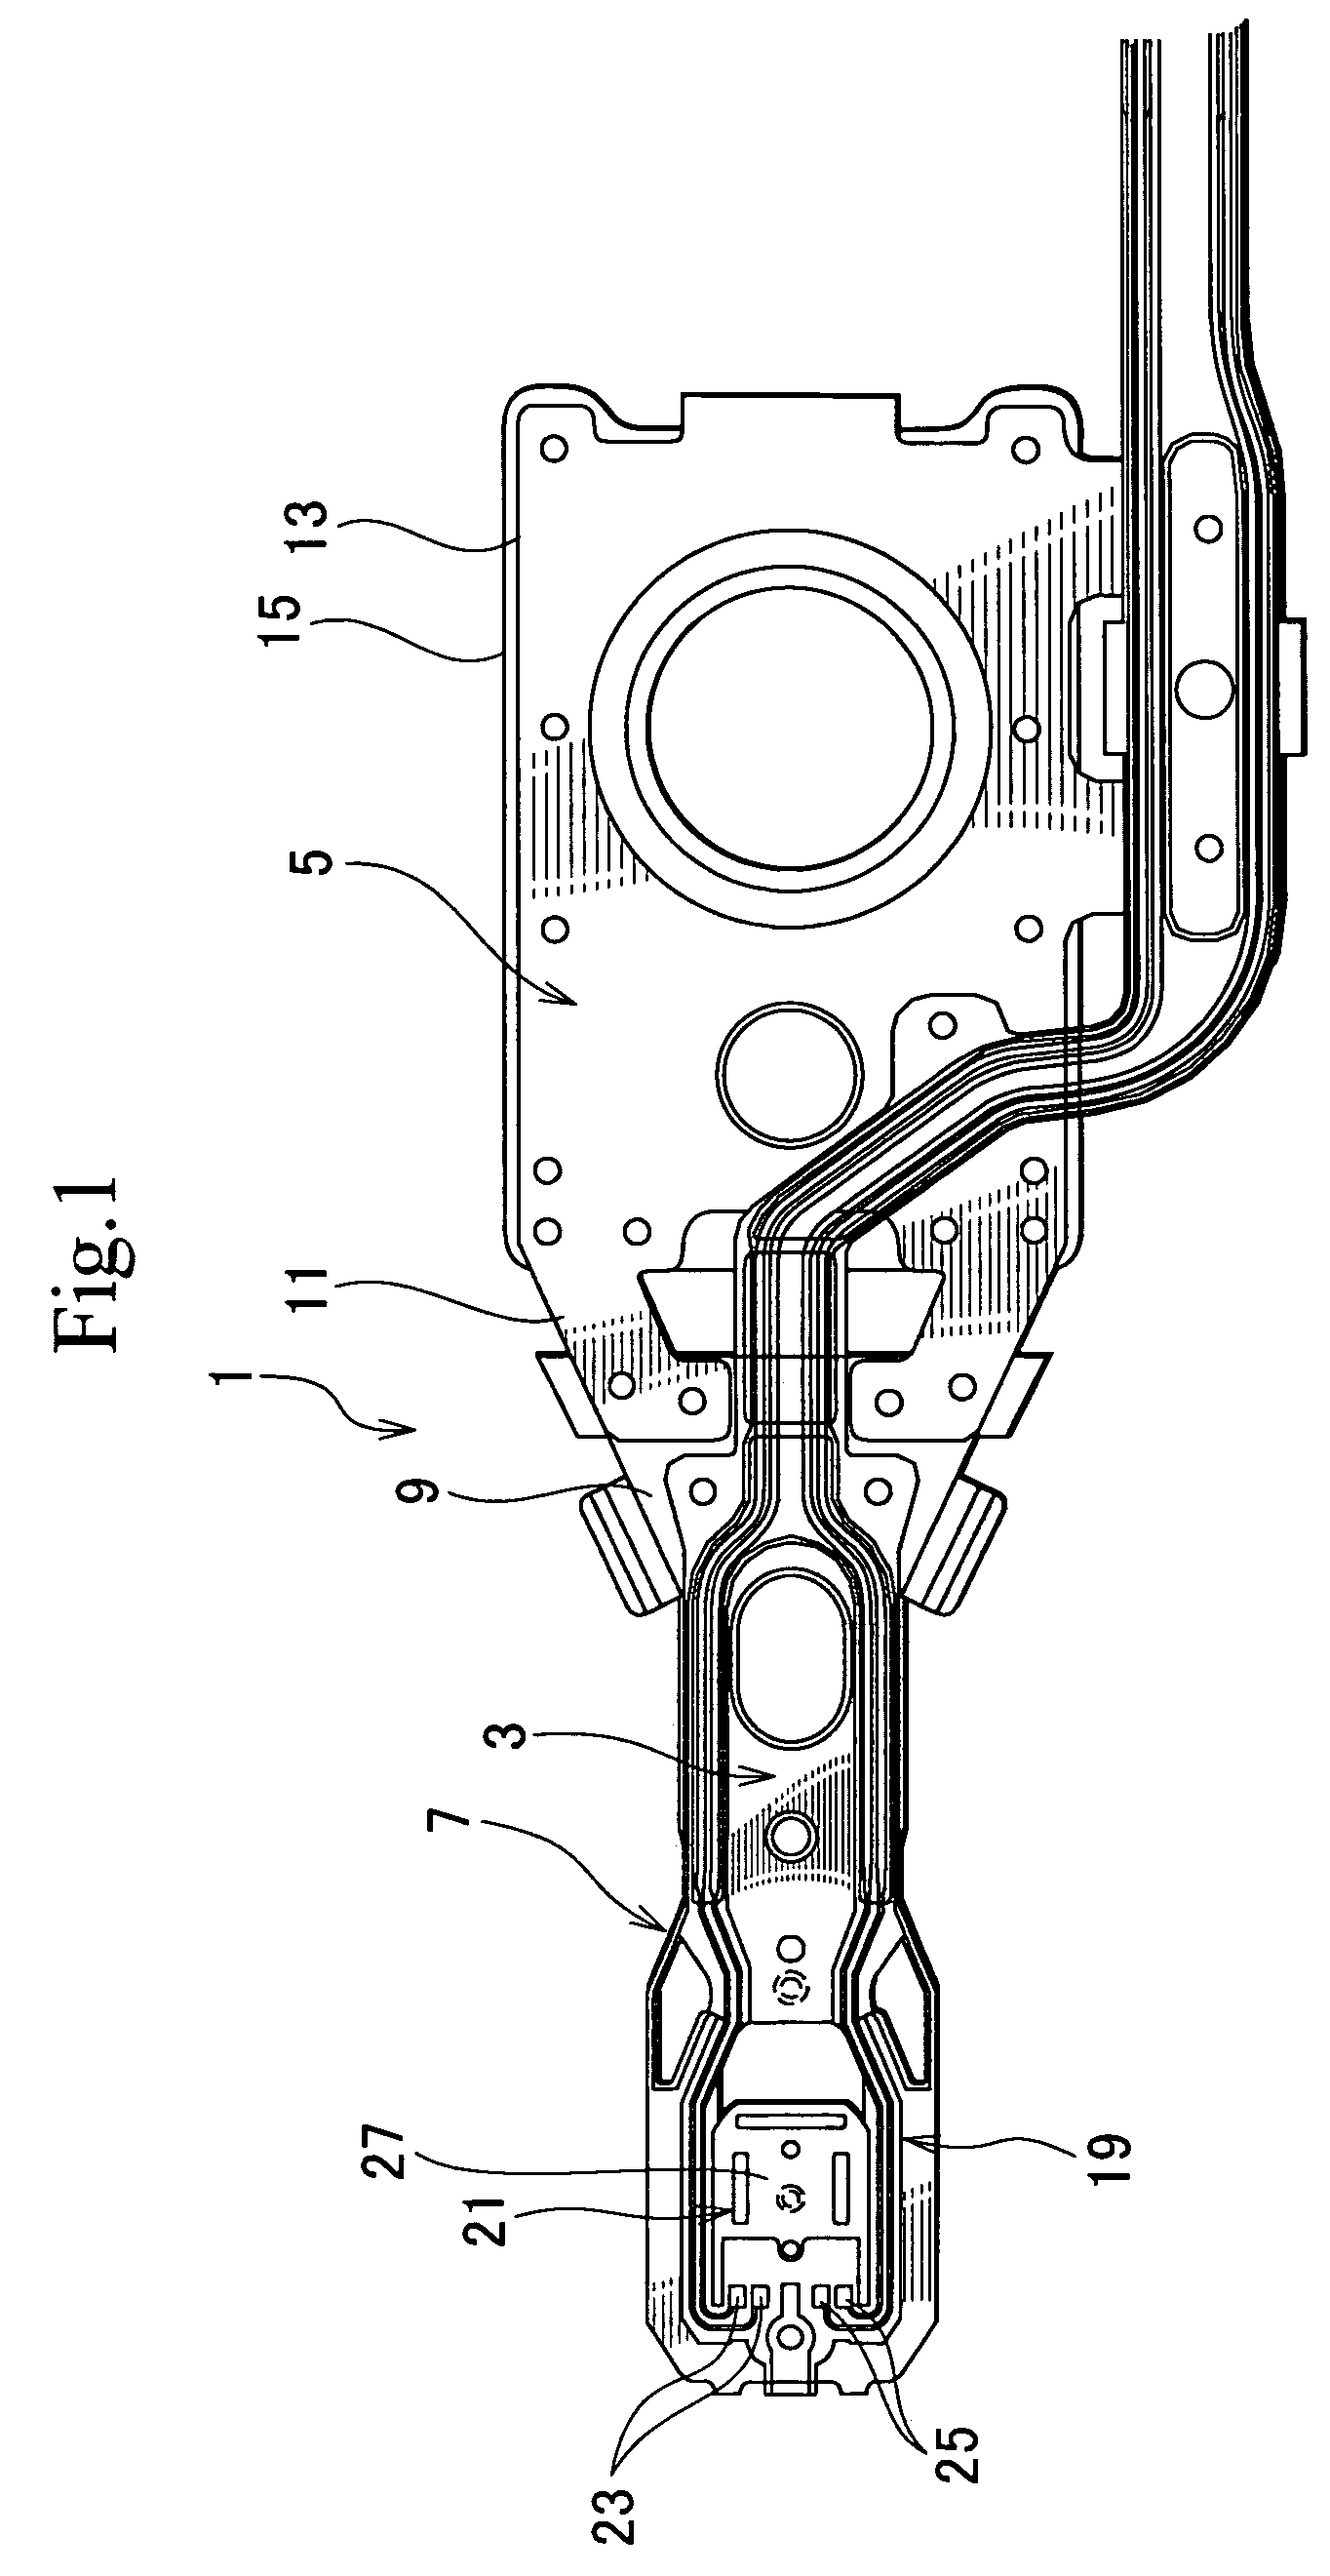 Head suspension having wiring disposed with conductive layer